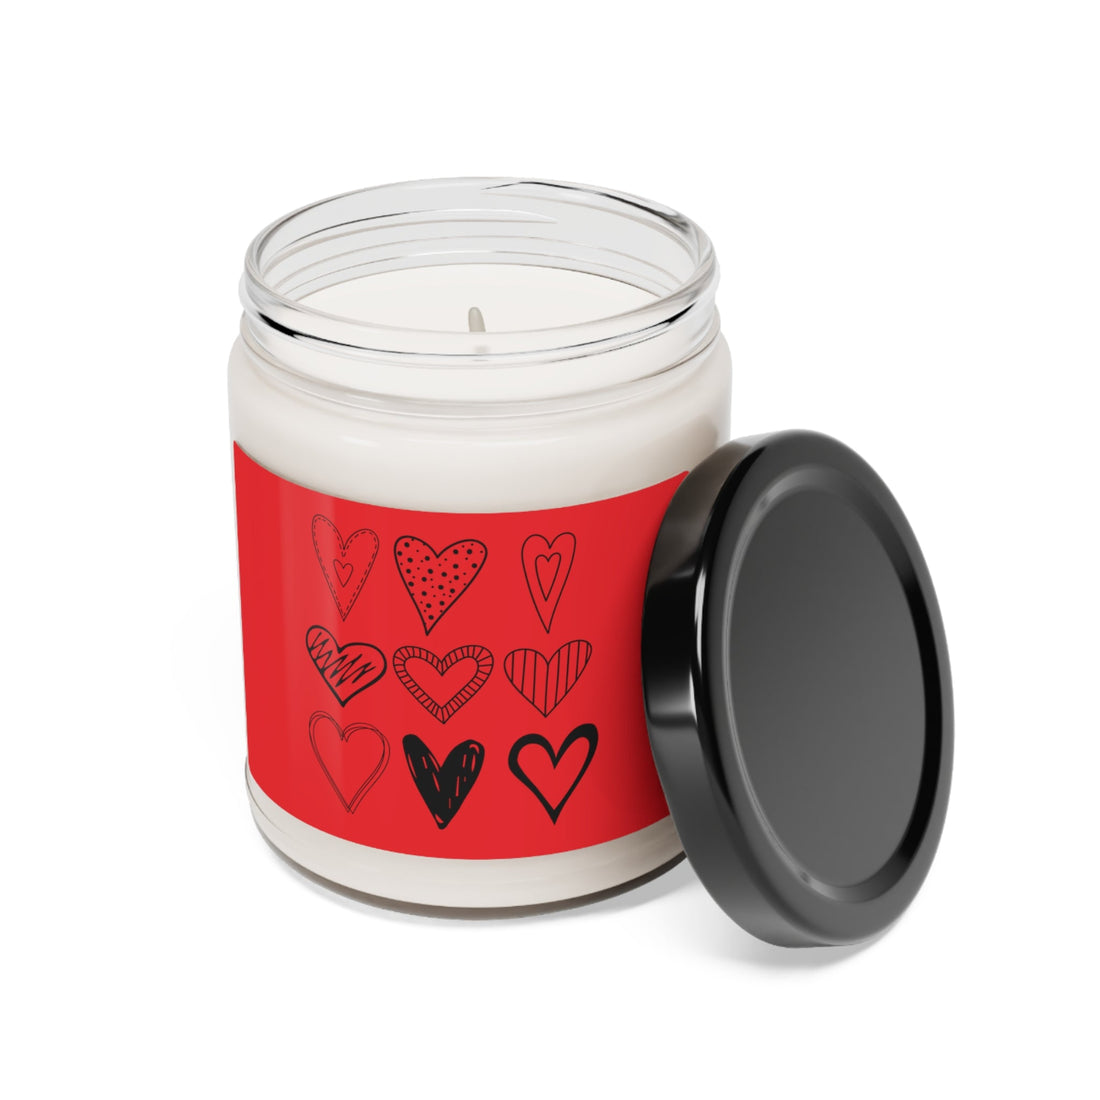 Hearts of Love Scented Soy Candle, 9oz - Home Decor - Positively Sassy - Hearts of Love Scented Soy Candle, 9oz